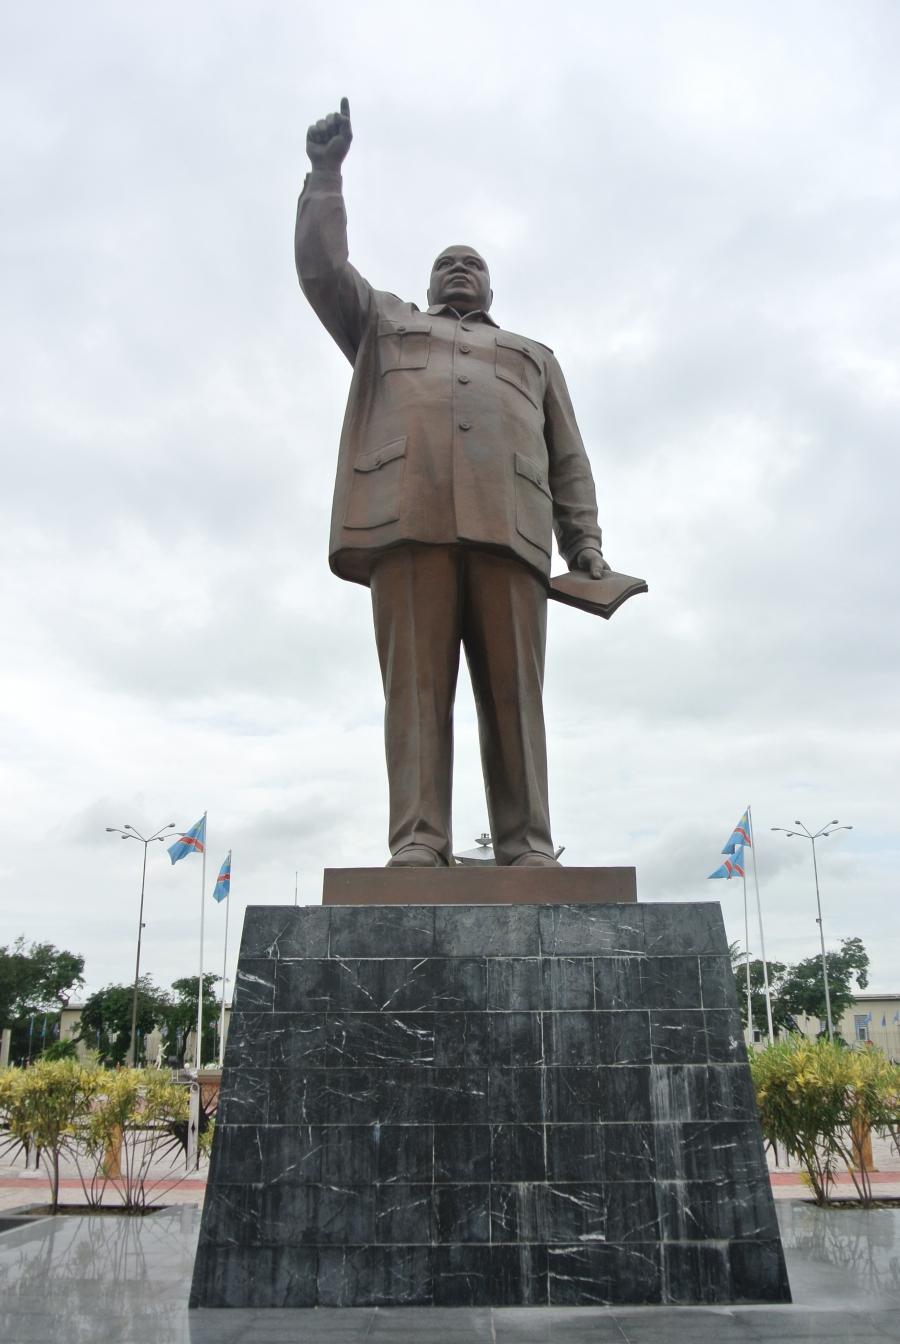 Many say this statue of Laurent Kabila in Kinshasa, DRC looks like he's wearing a suit from the Kim's tailor.